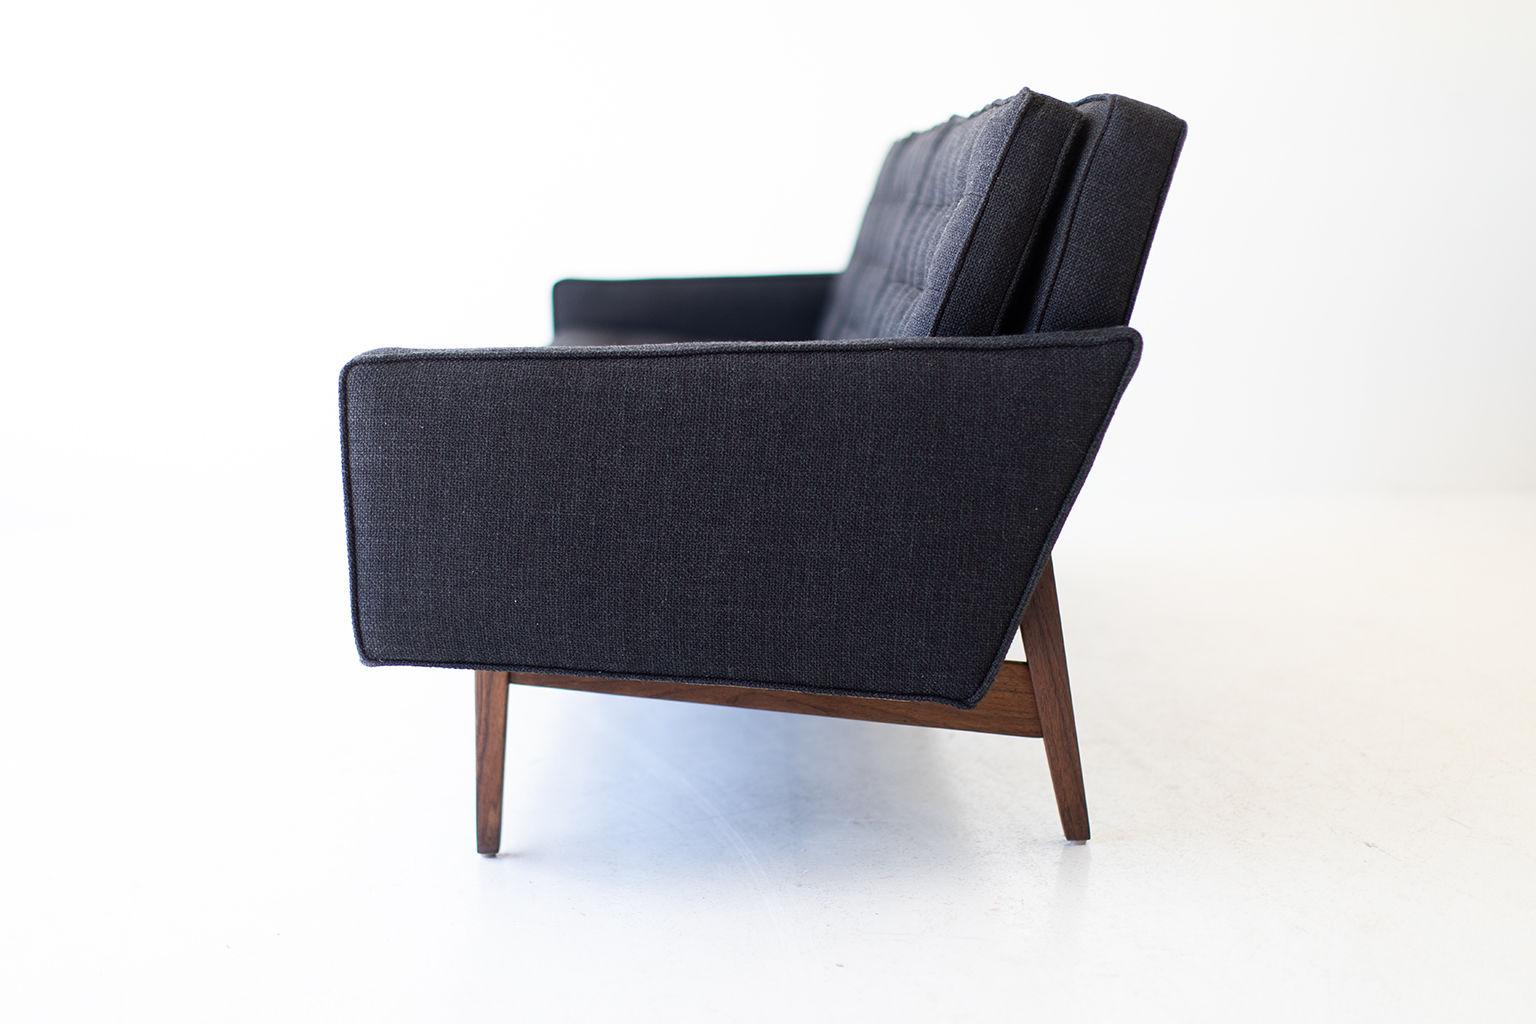 Designer: Jack Cartwright

Manufacturer: Founders Furniture.
Period or model: Mid-Century Modern.
Specs: Walnut, thick weave fabric.

Condition:

This Jack Cartwright sofa for Founders Furniture is in excellent restored condition. The sofa